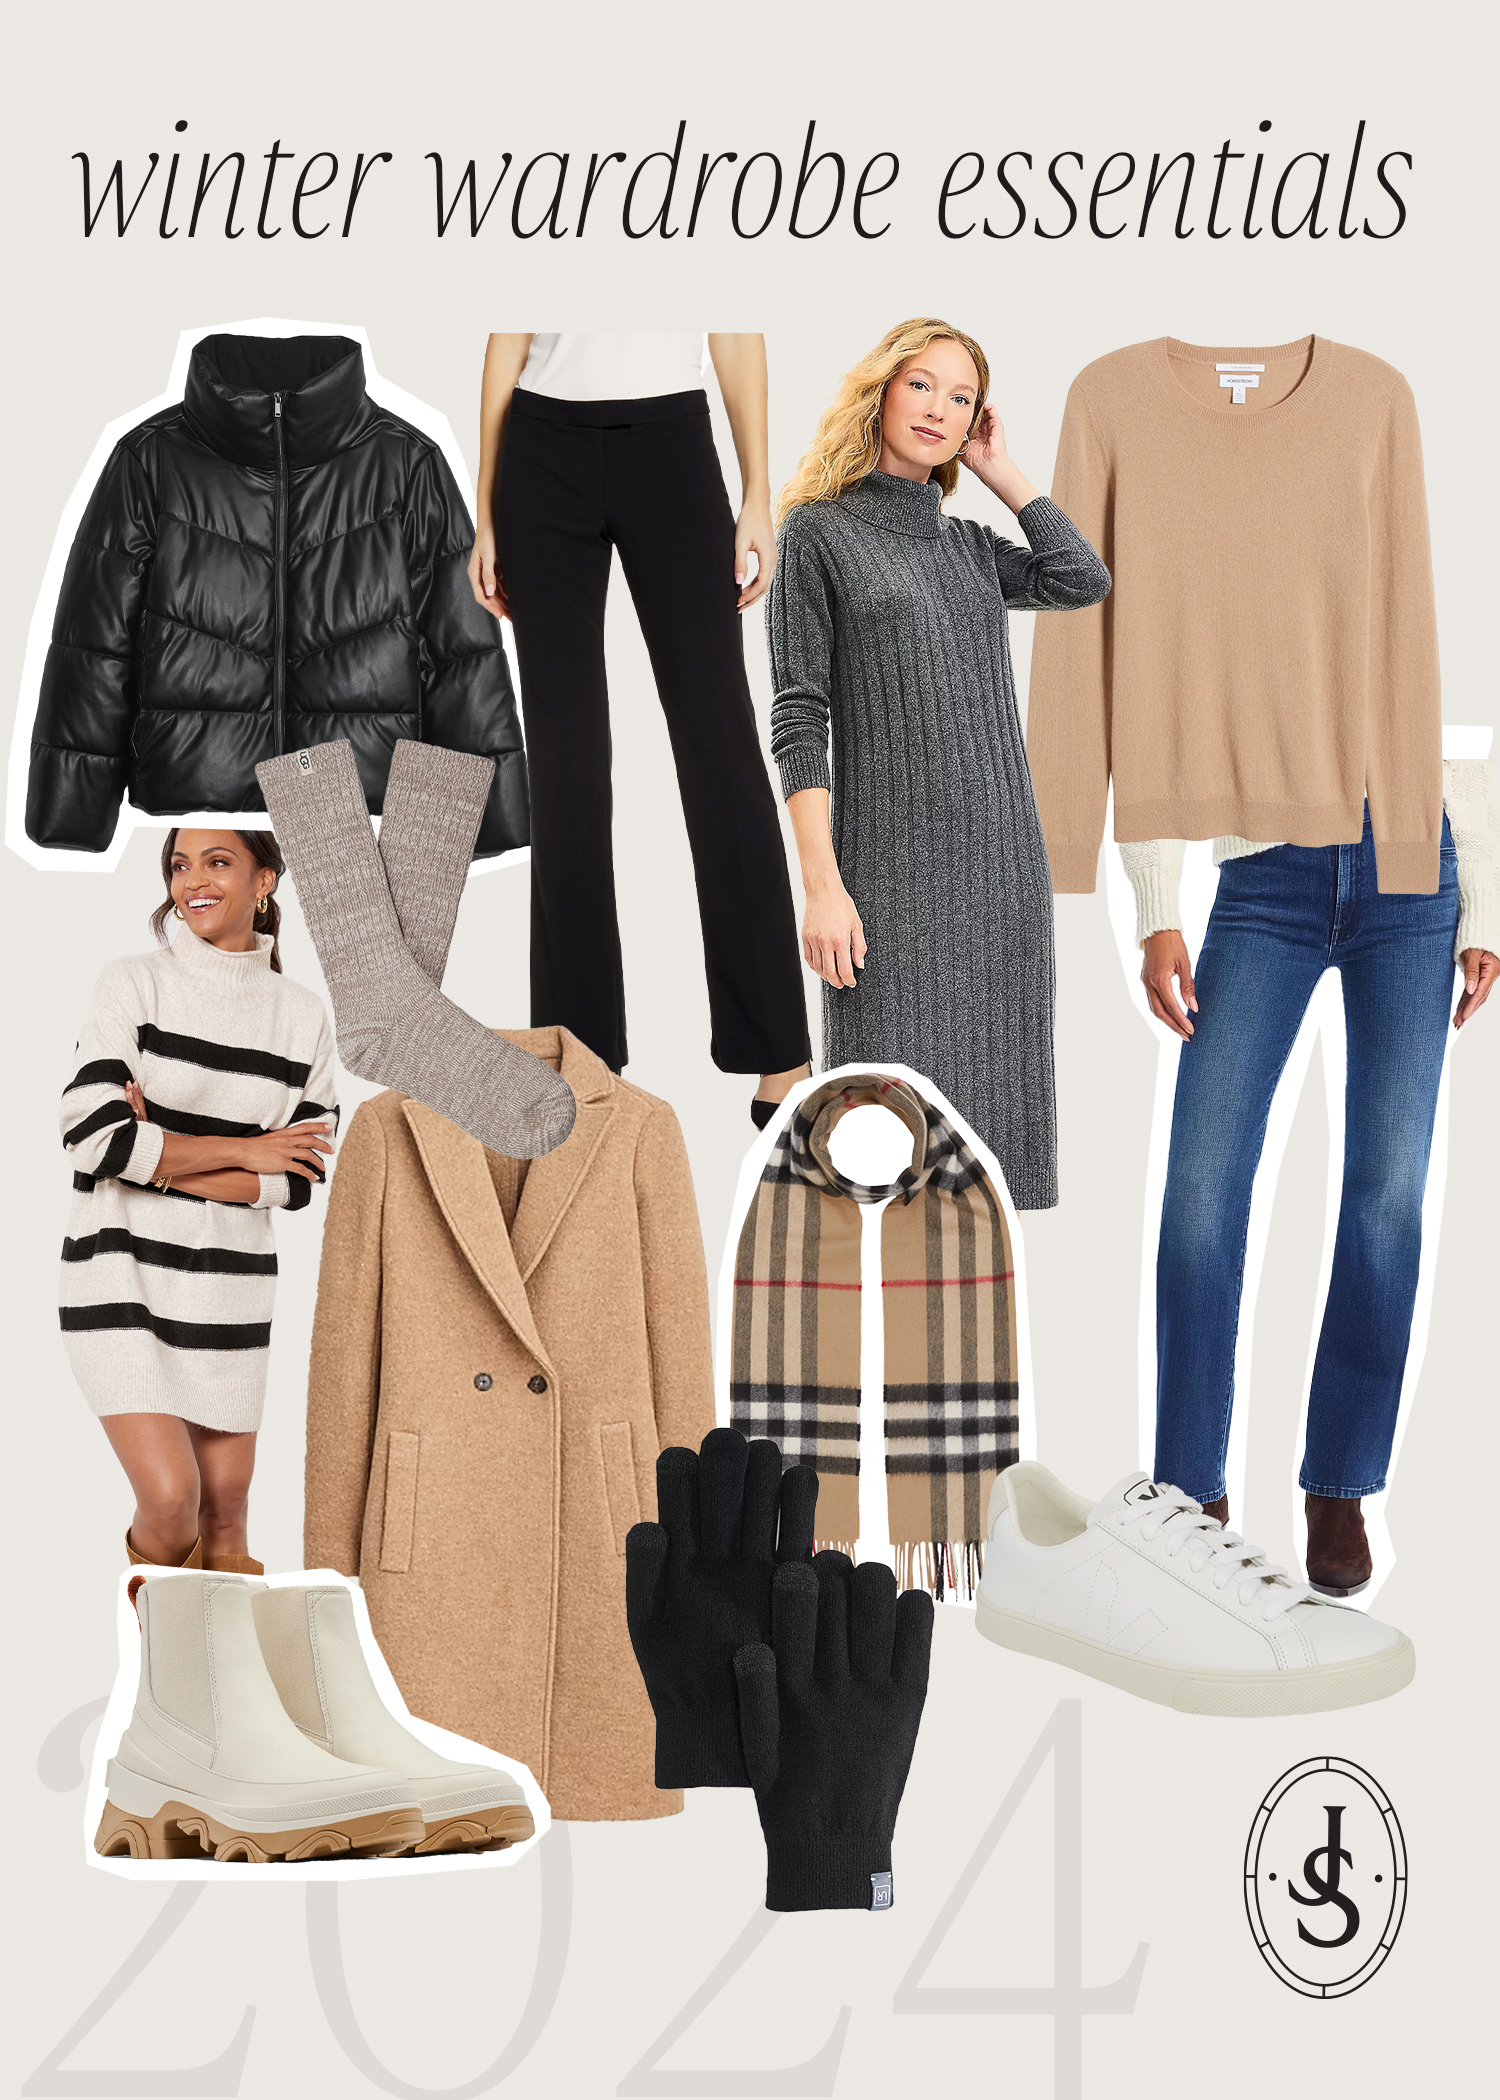 Top 10 Clothing Essentials to Add to Your Winter Capsule Wardrobe